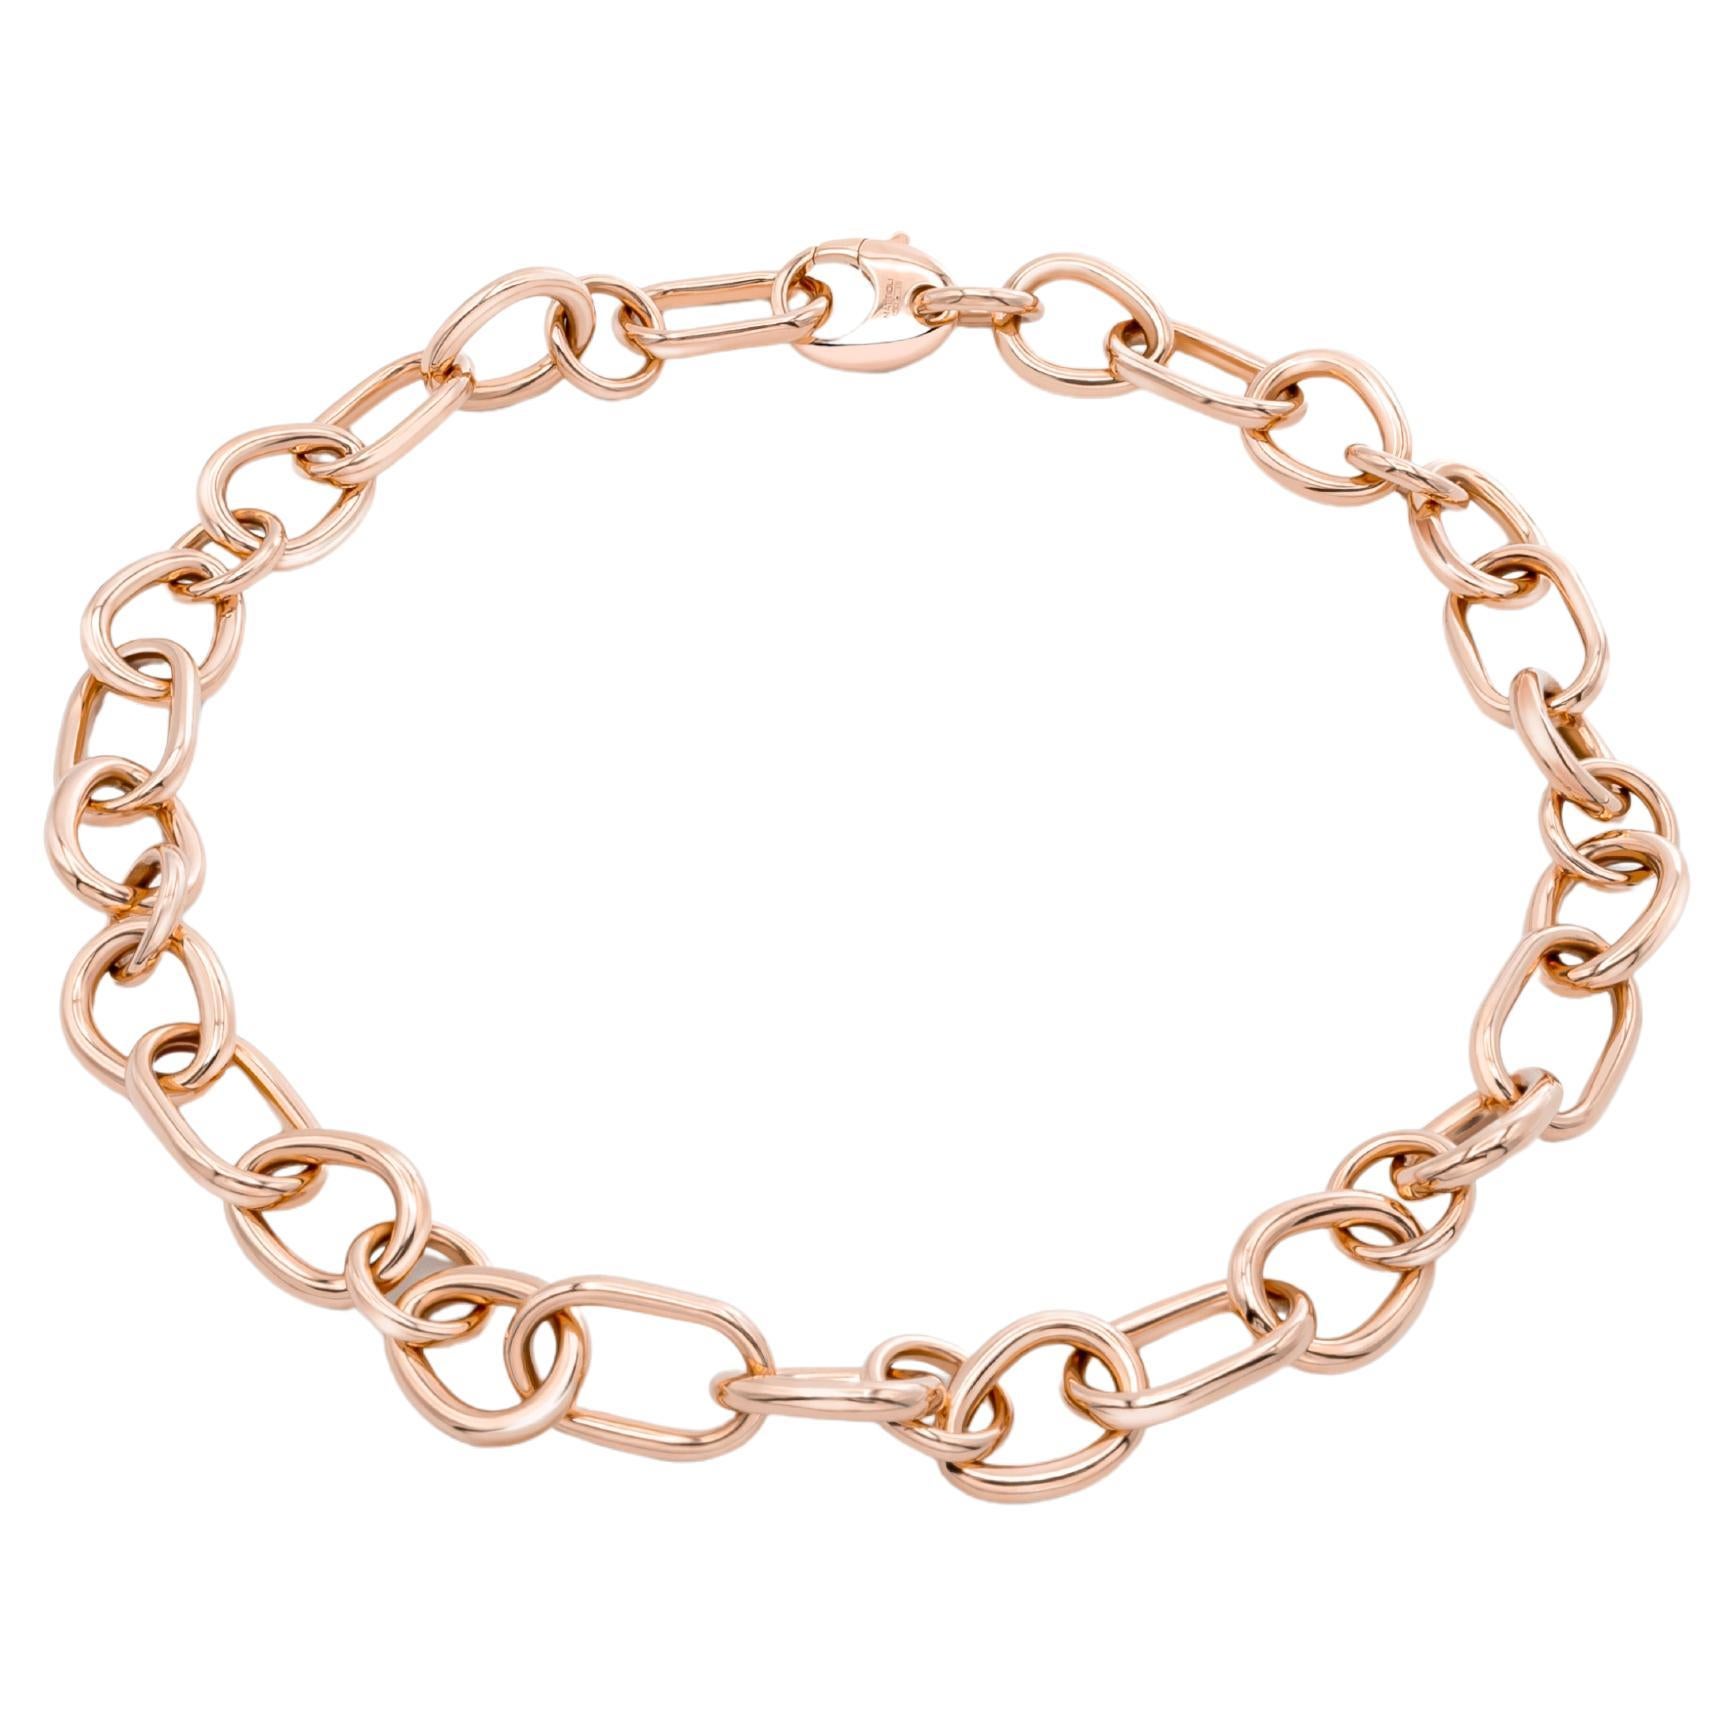 Mattioli Gocce Necklace in 18k Rose Gold For Sale